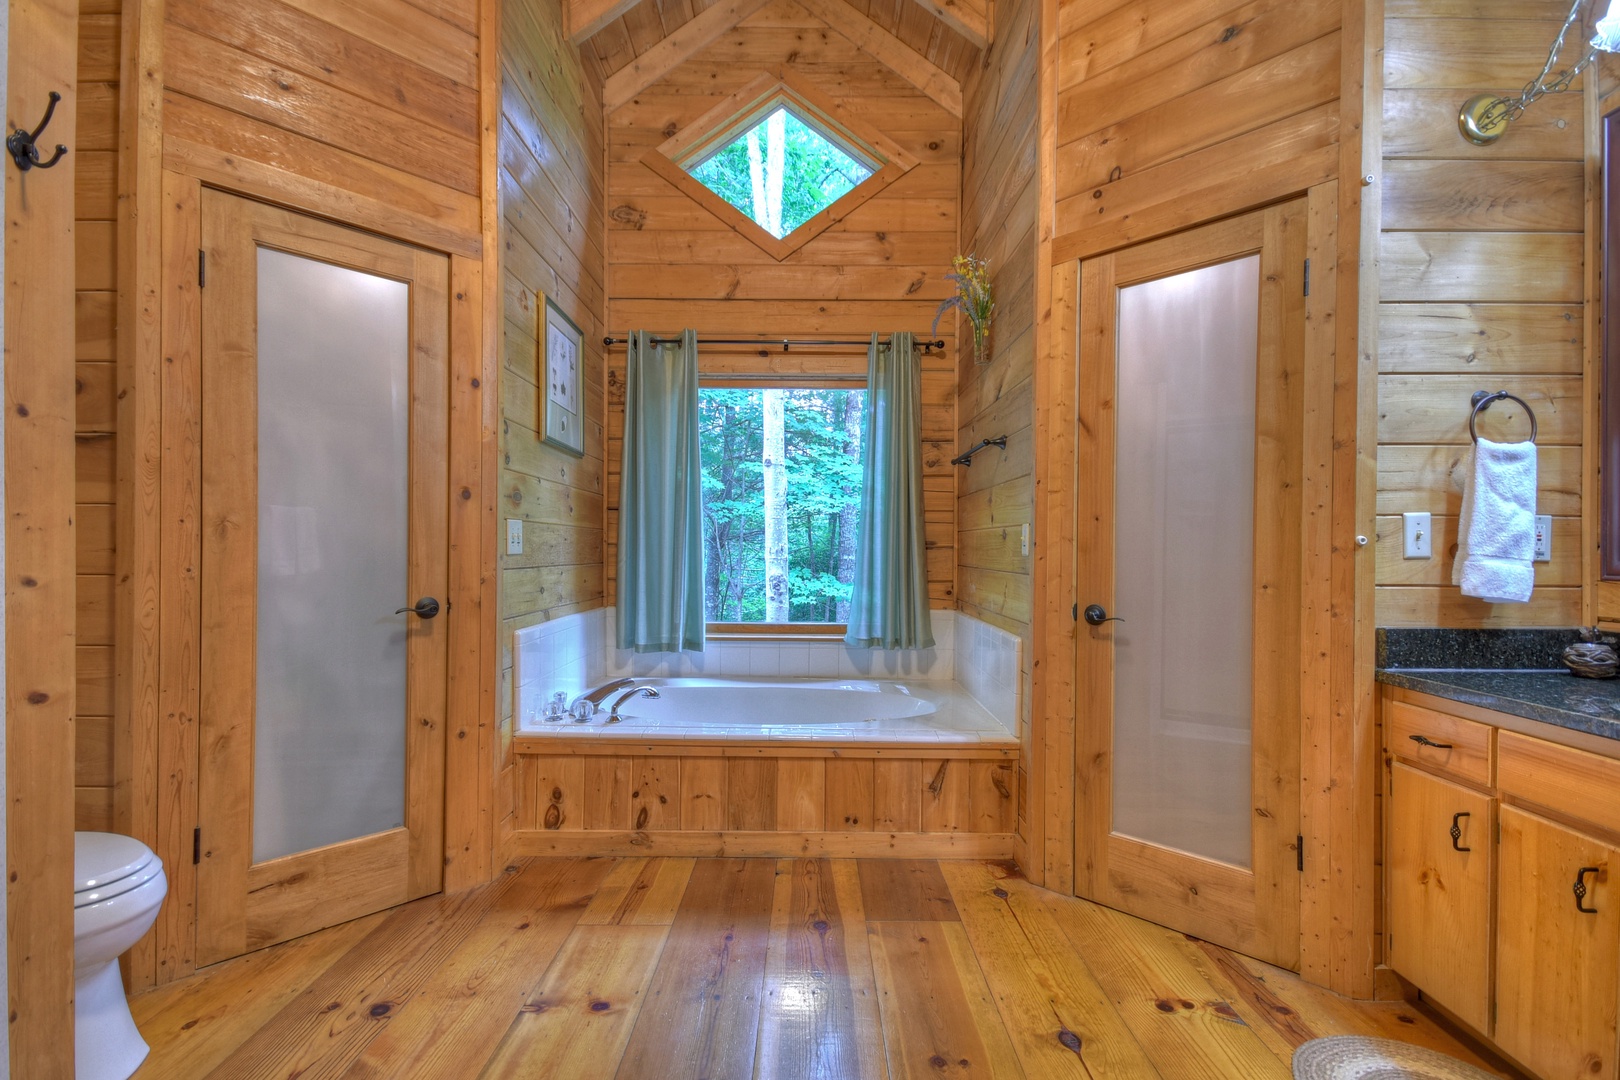 Falling Leaf- Master bathroom with a soaker tub and window view